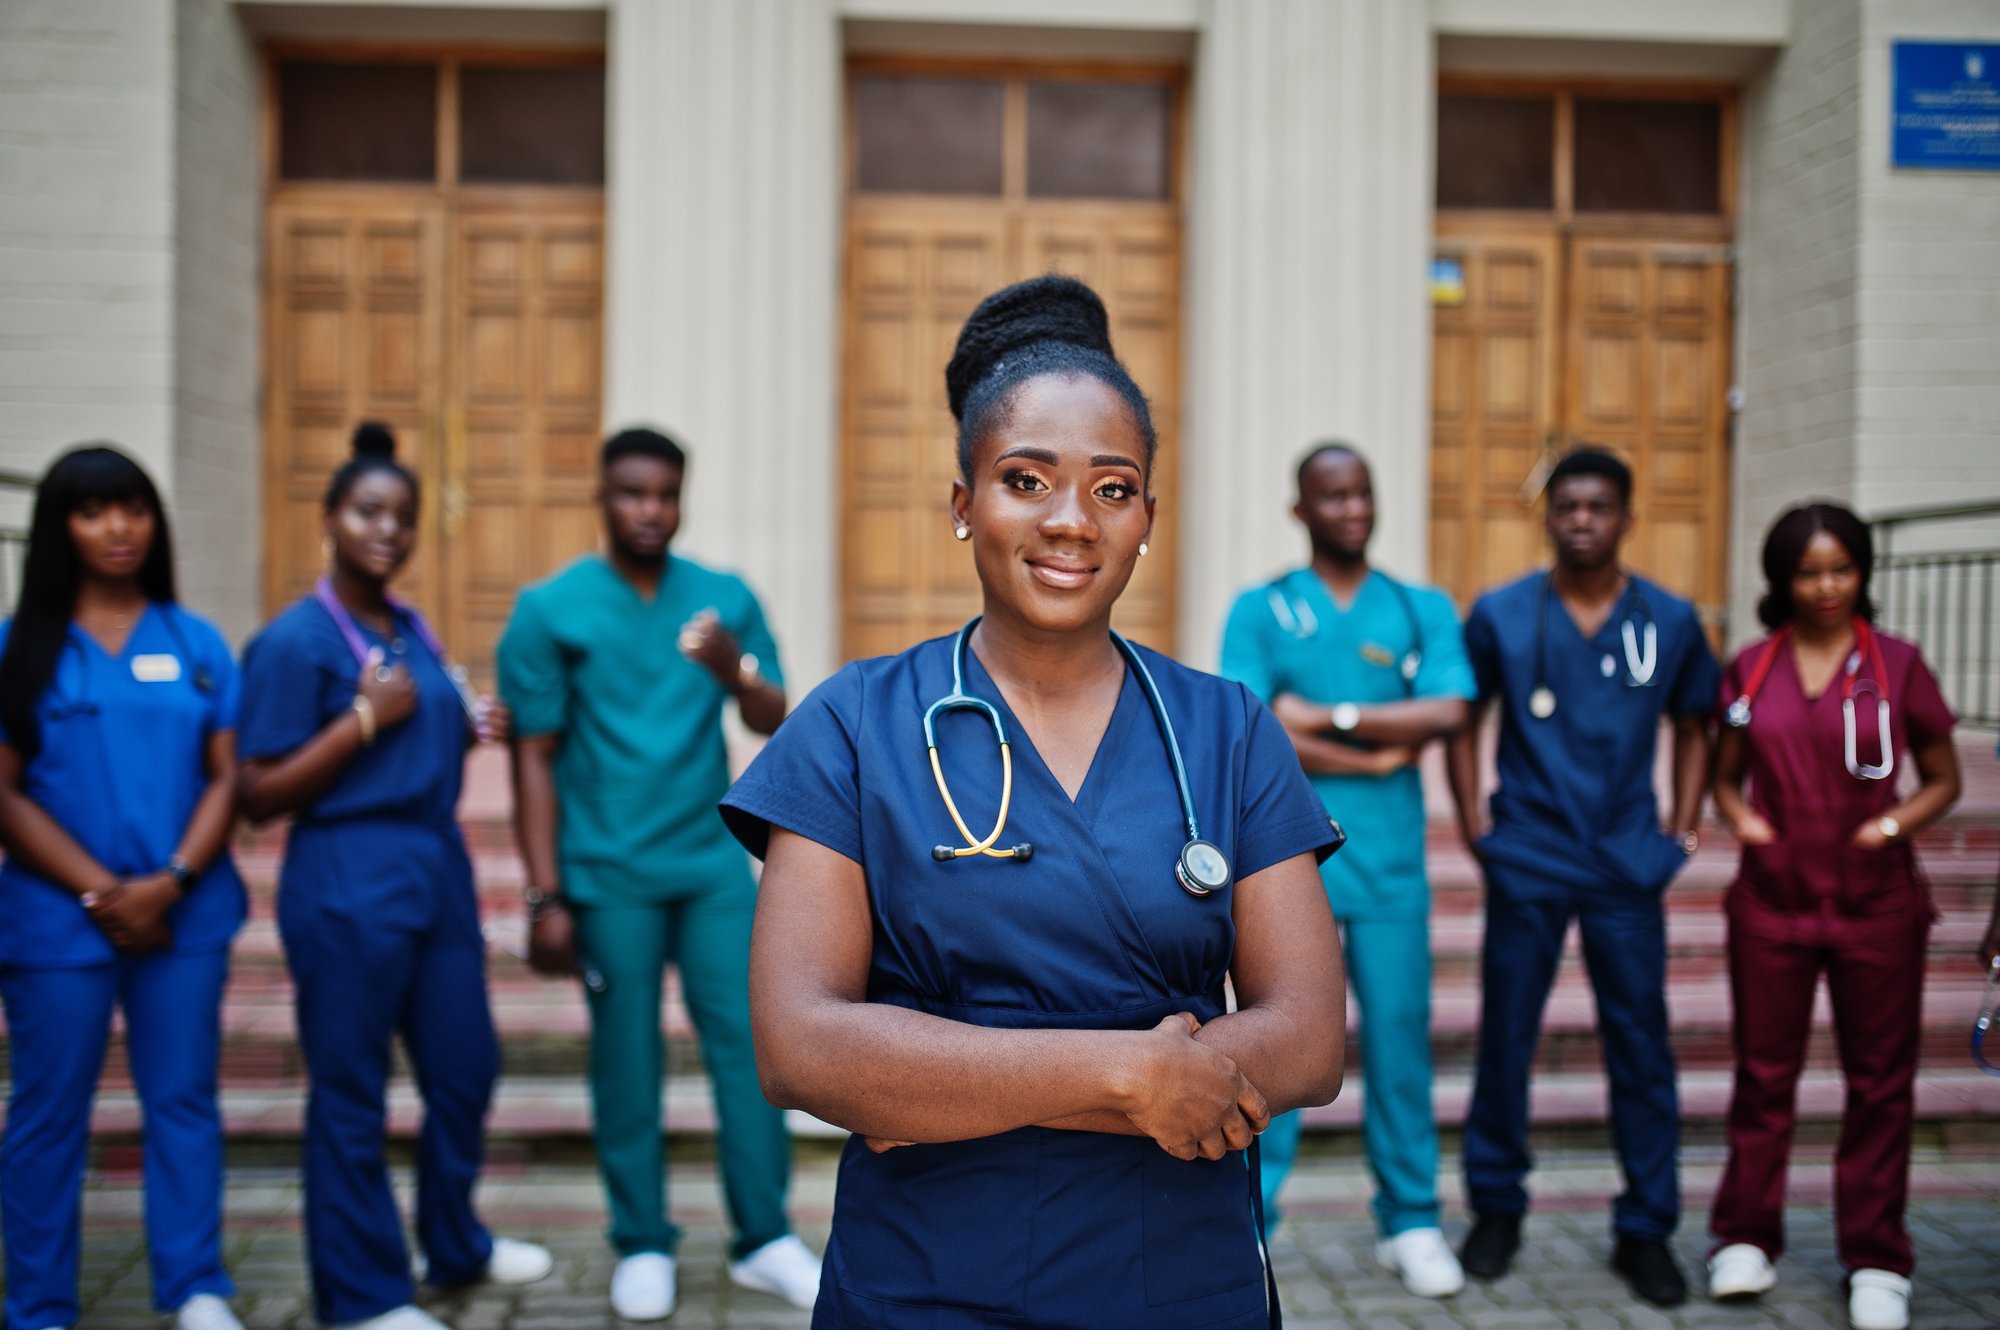 group-african-medical-students-posed-outdoor-against-university-door